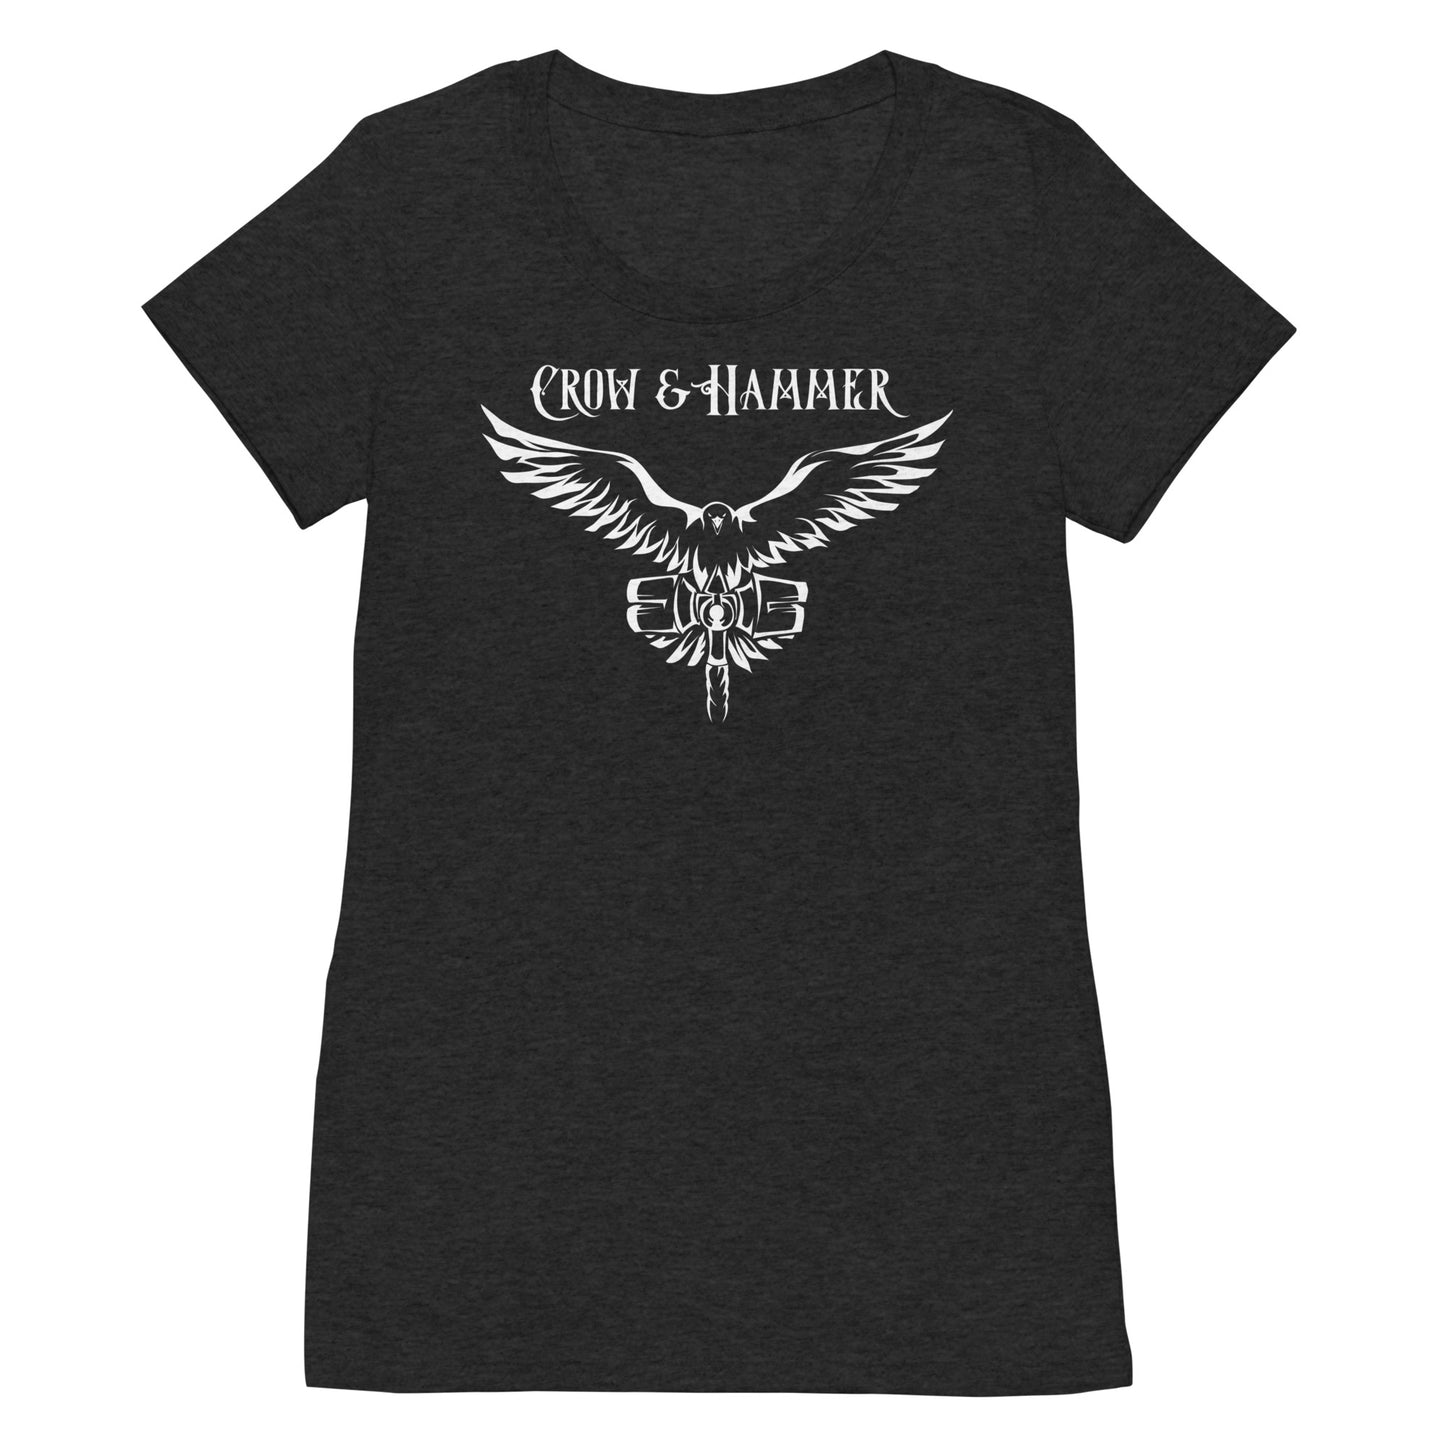 "The Crow & Hammer" Ladies' Fitted T-shirt (The Guild Codex)